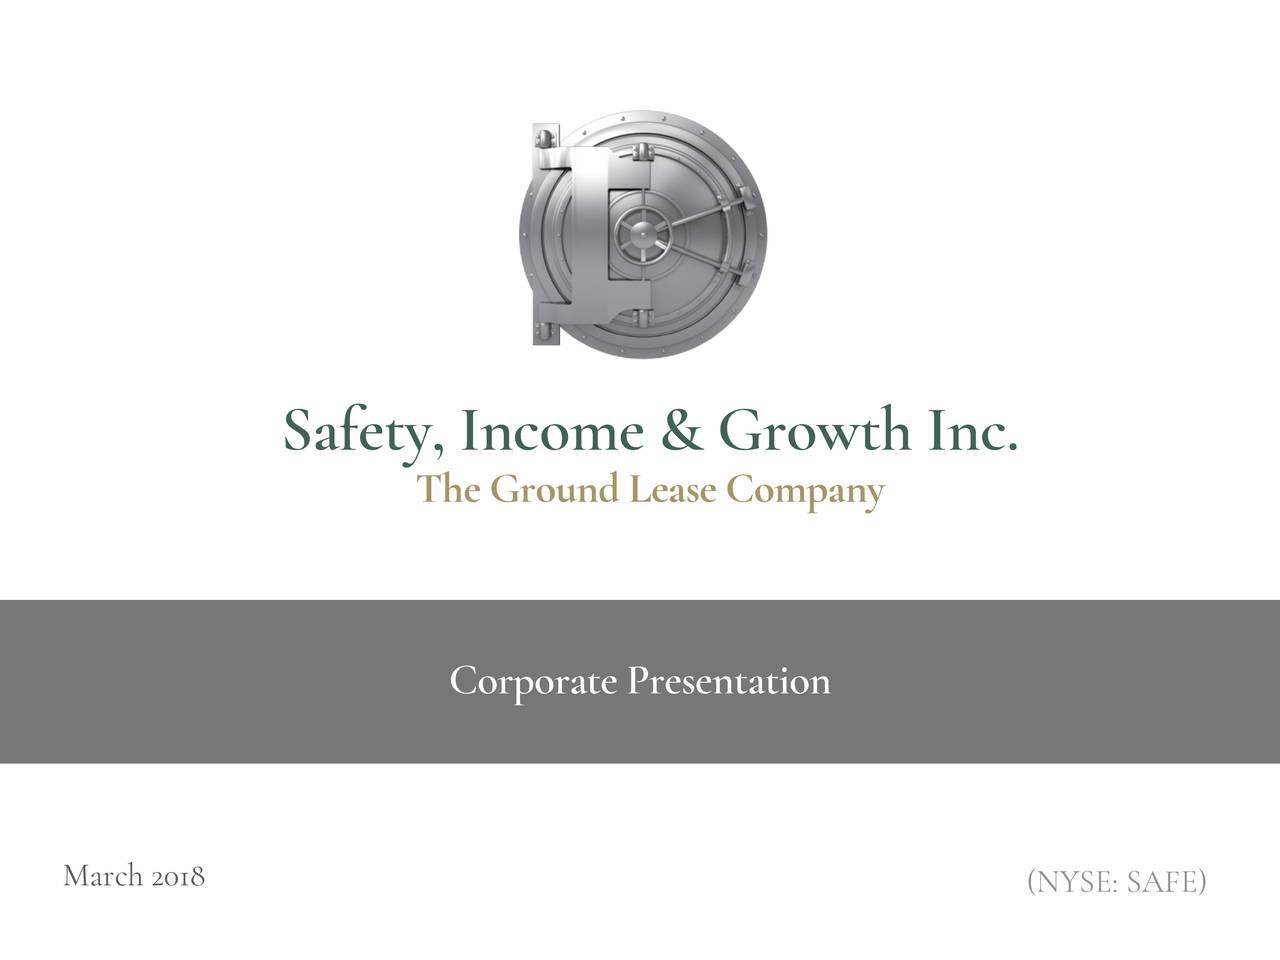 Safety, Income & Growth Inc.